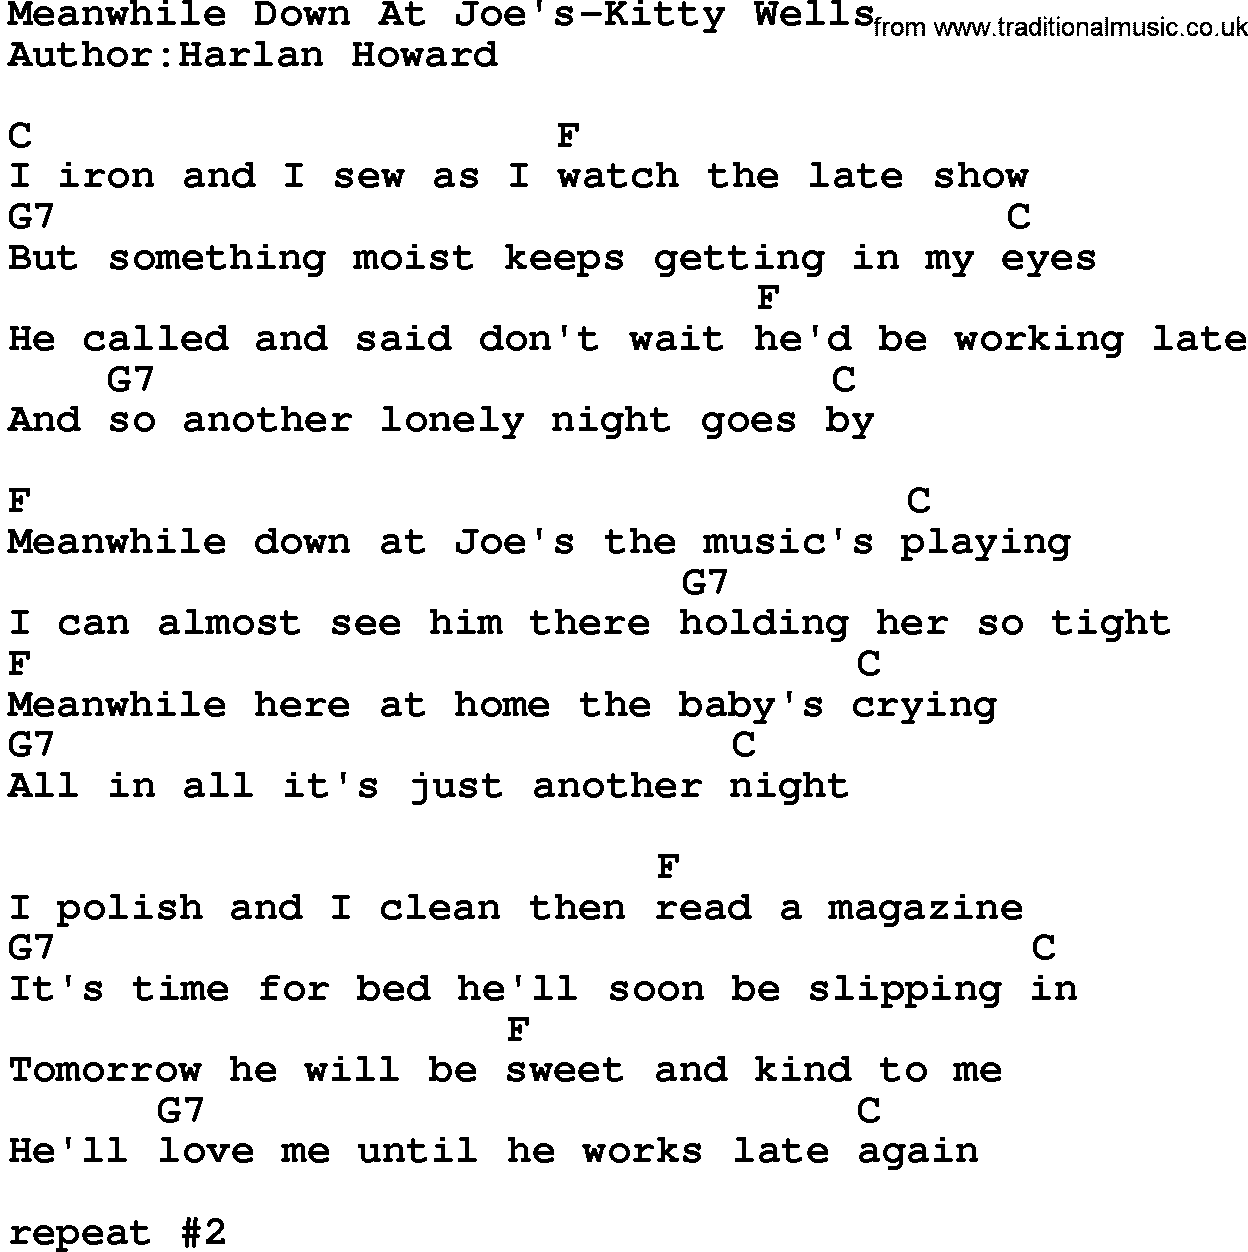 Country music song: Meanwhile Down At Joe's-Kitty Wells lyrics and chords